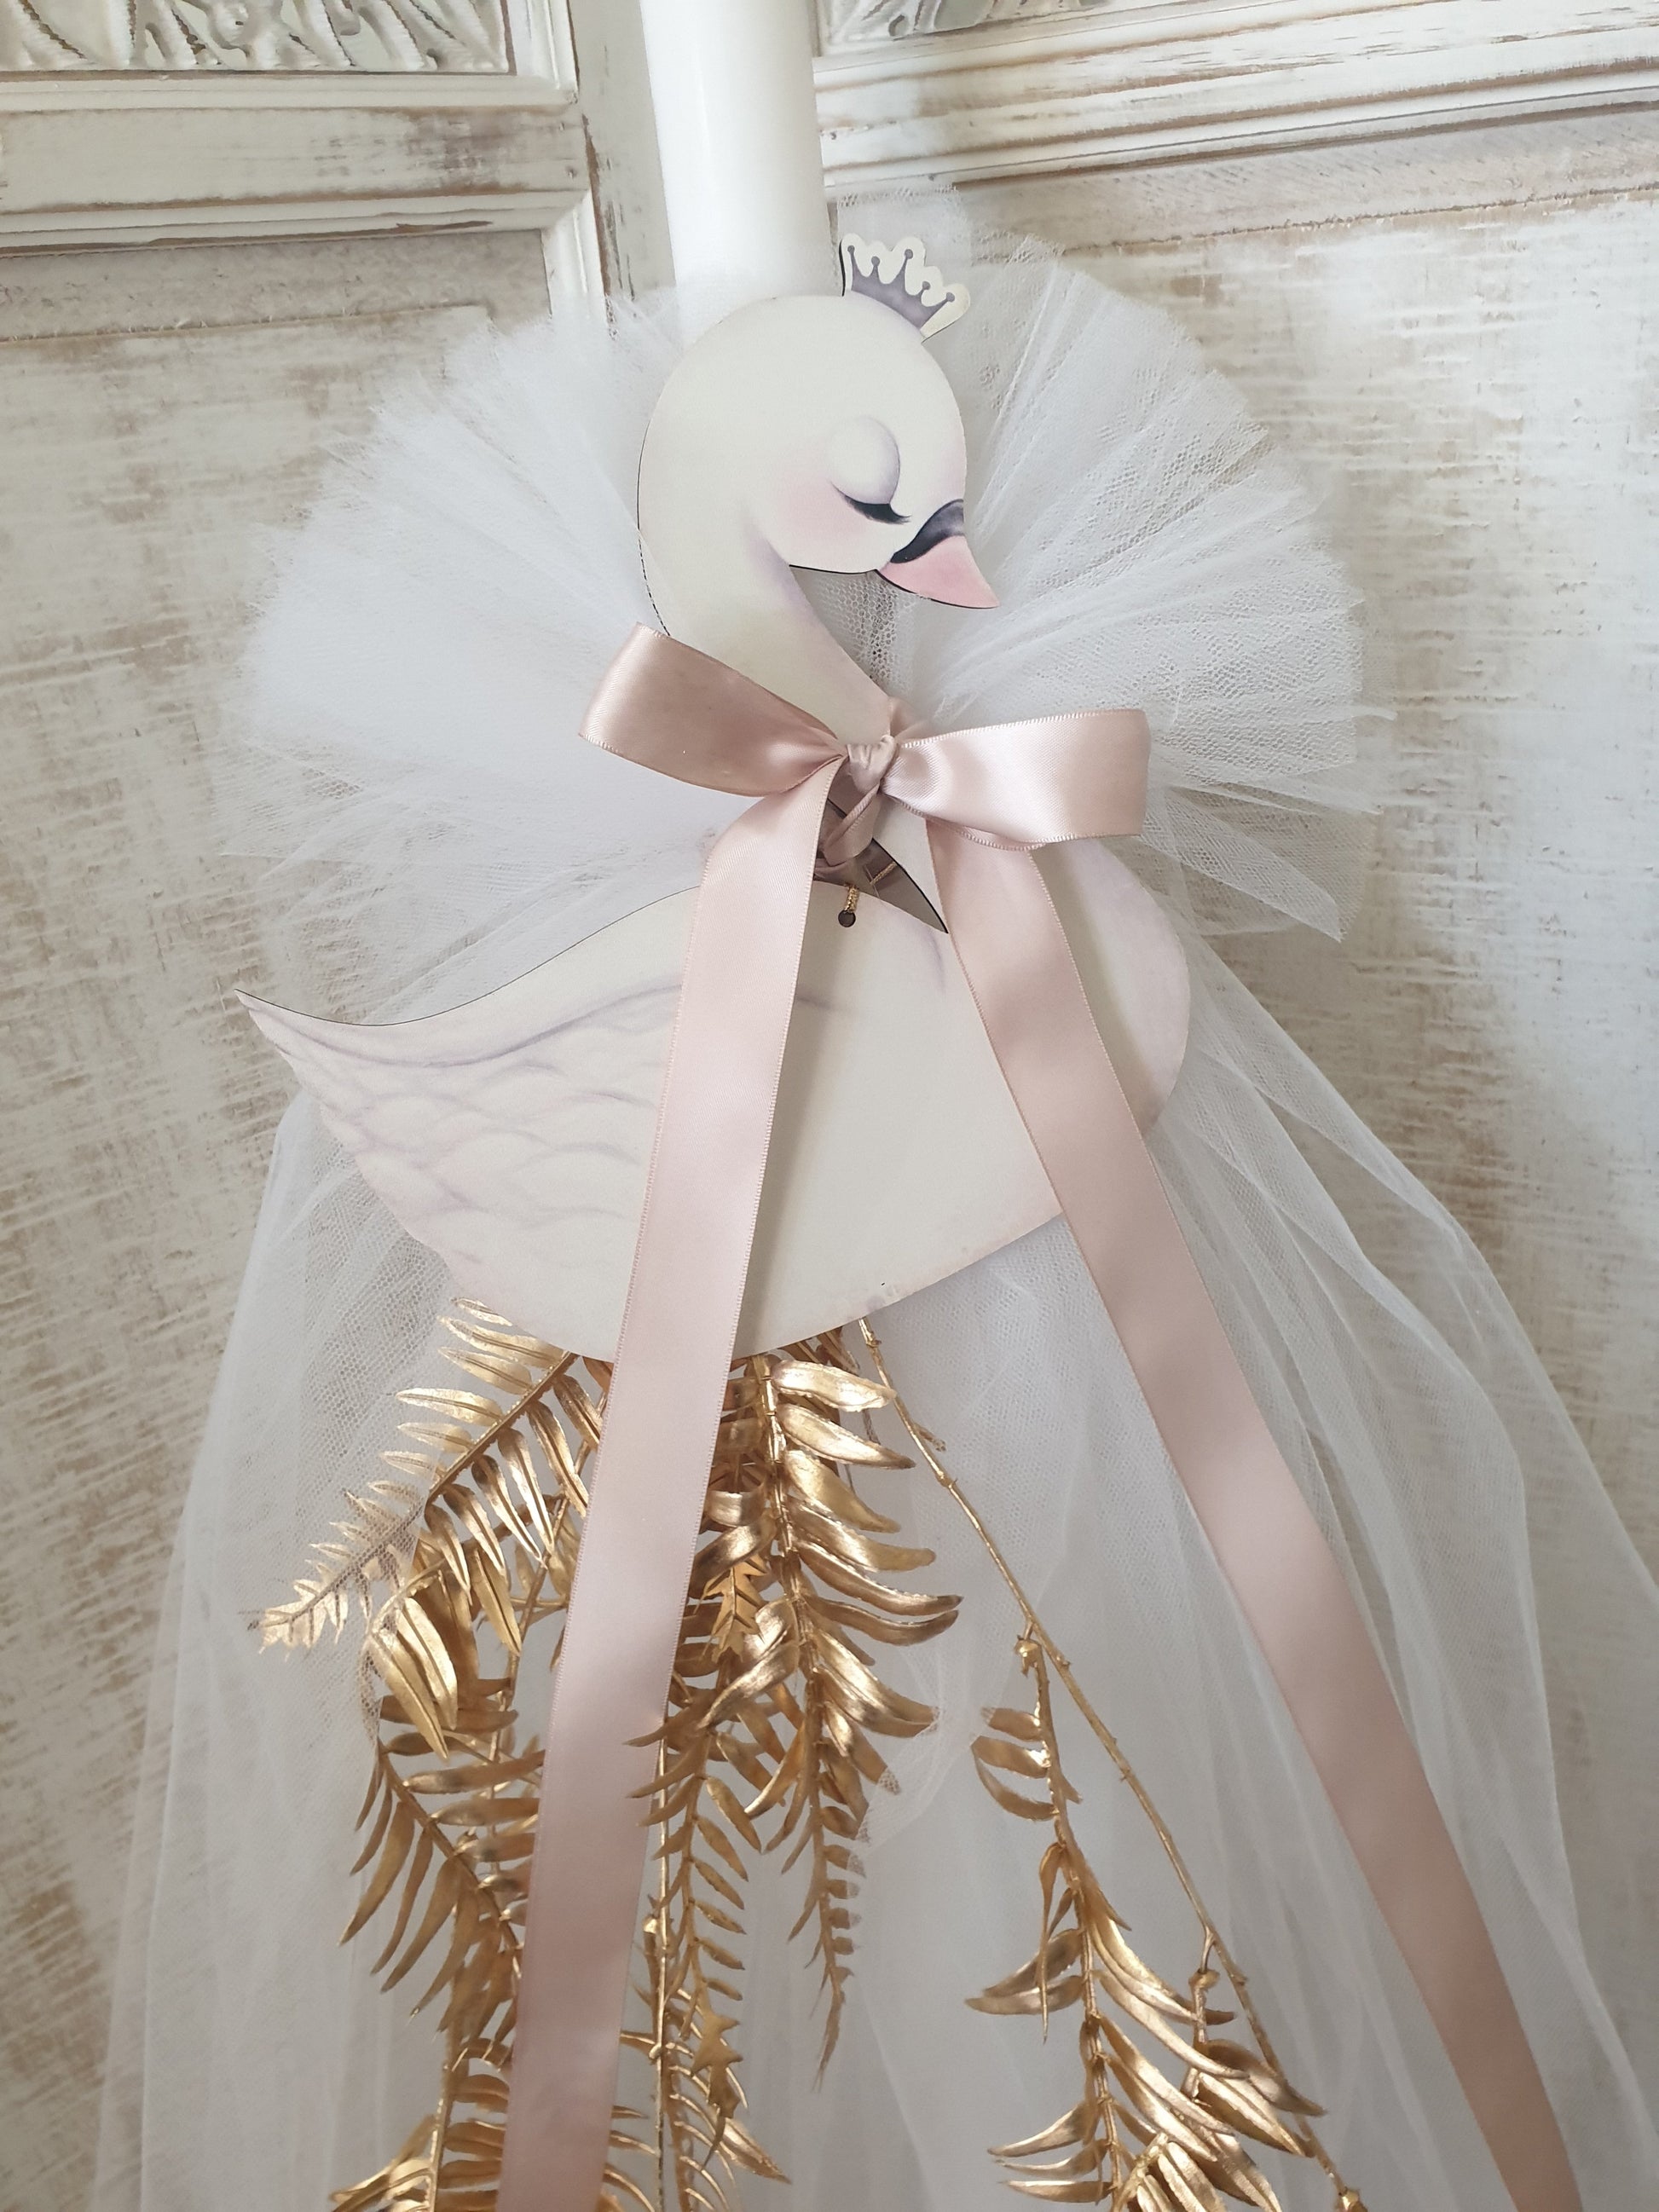 Orthodox Christening Candle - Swan with Gold Fern | Pandora Designs Melbourne